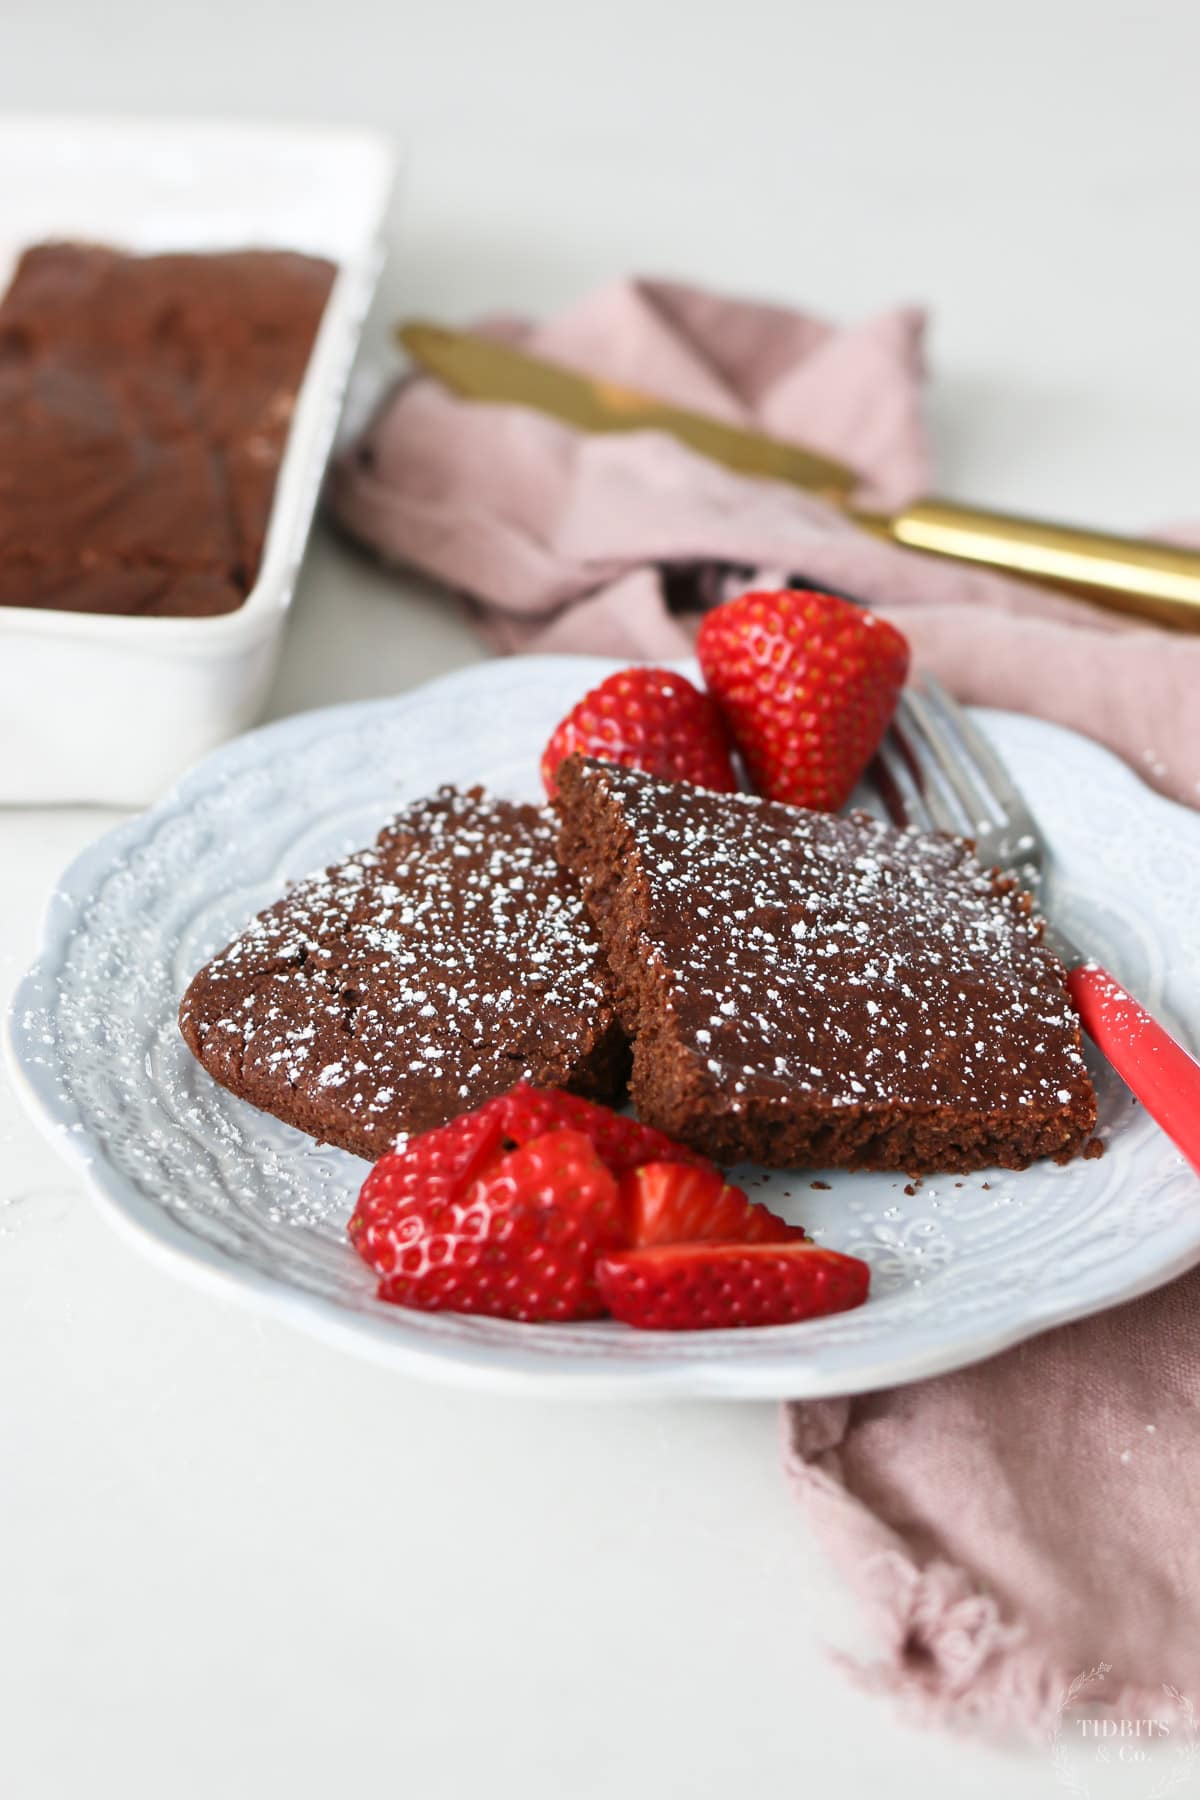 A while plate holds healthy cake like chocolate brownies and some sliced strawberries